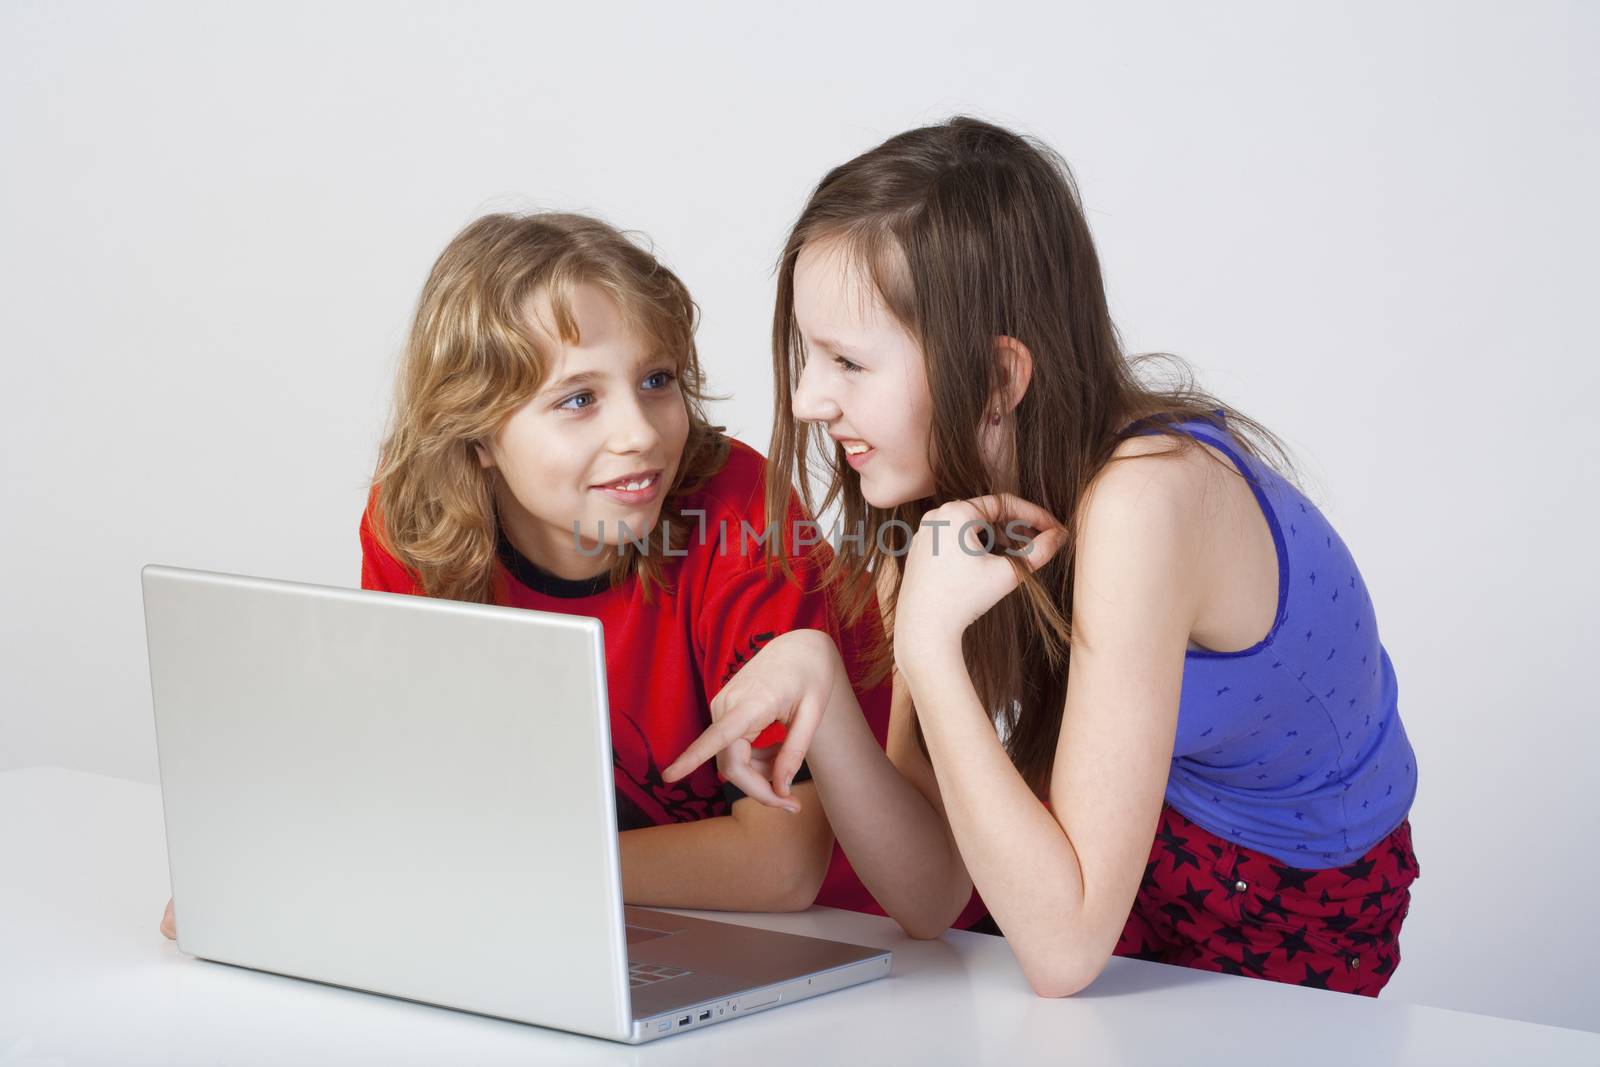 boy and girl with laptop by courtyardpix